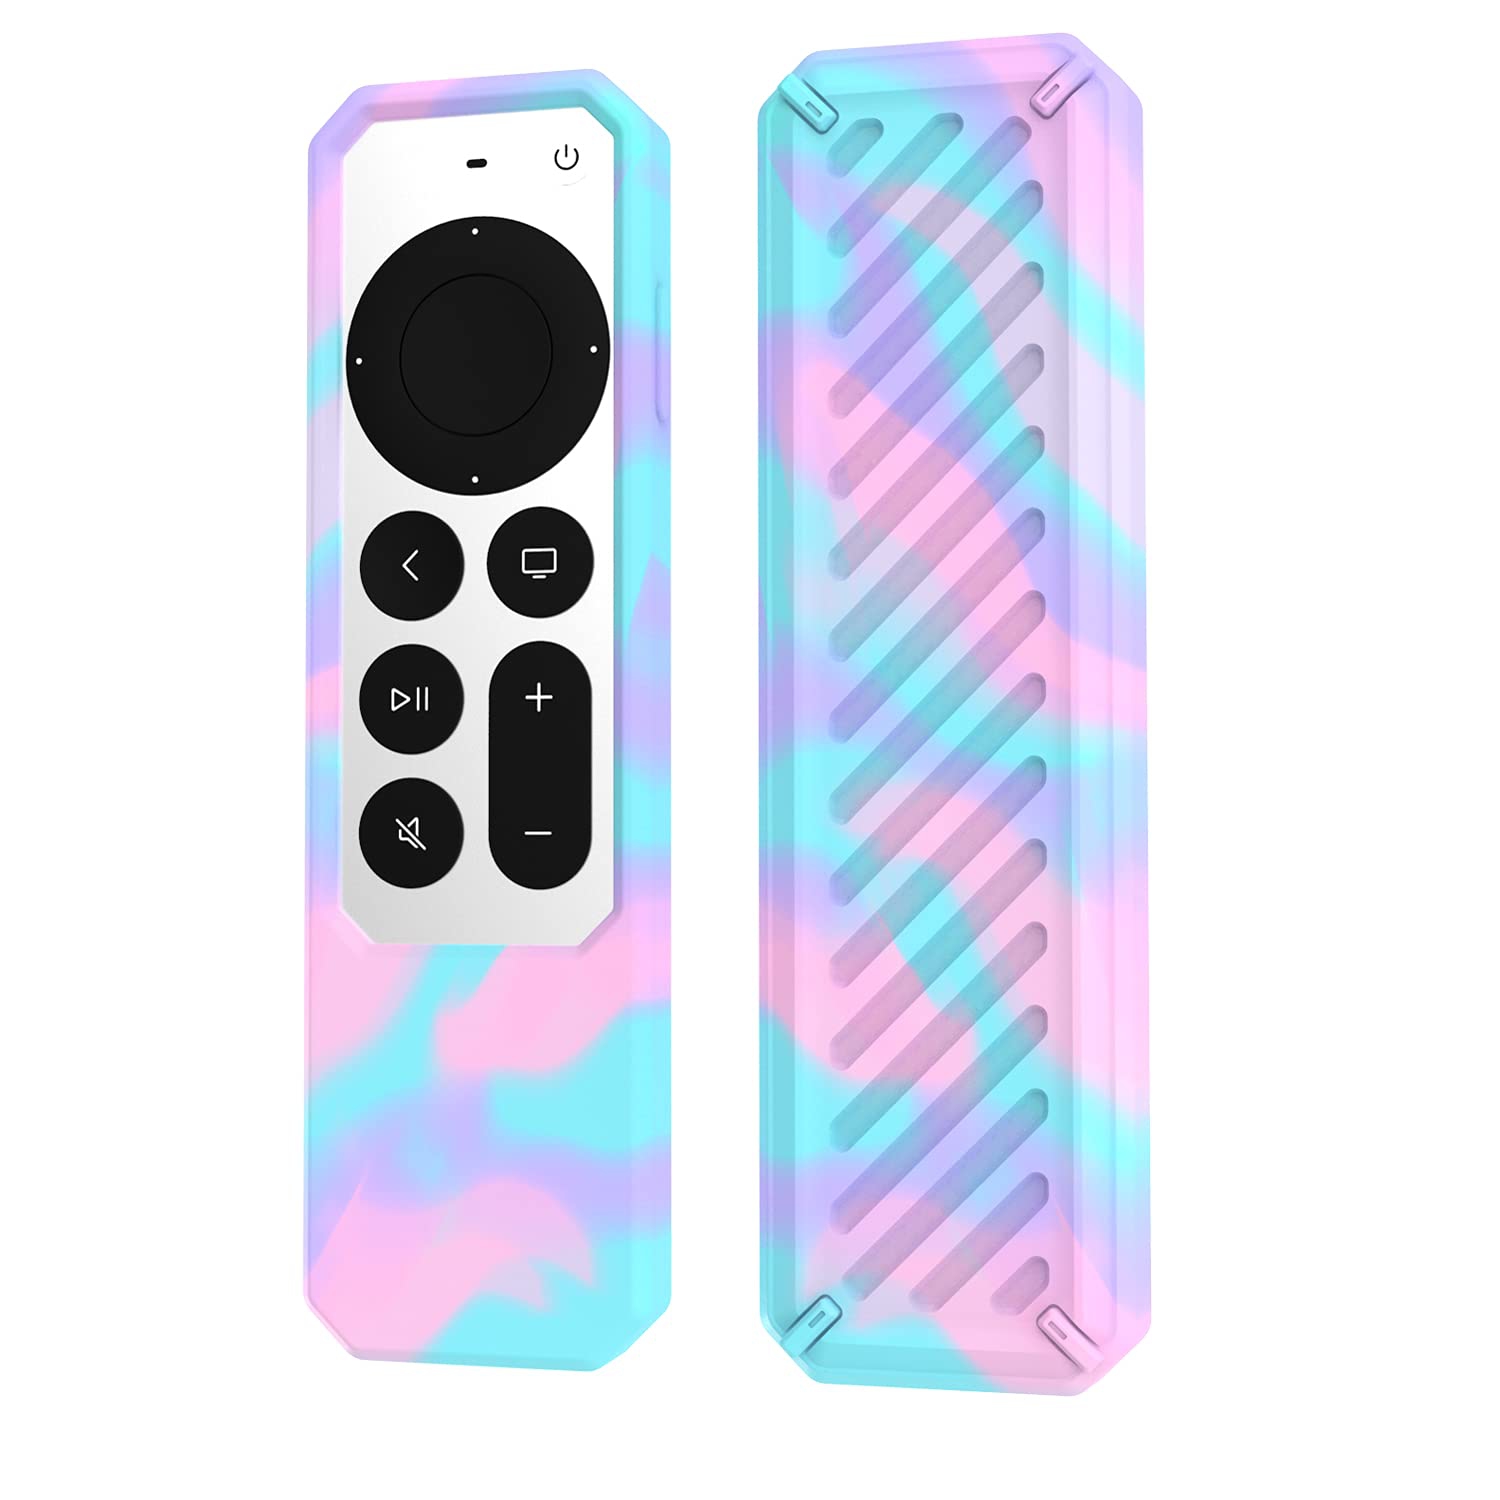 Protective Case for Siri Remote Control Anti-Slip Durable Silicone Shockproof Rubber Cover for Apple 4K HD TV Siri Remote (2nd Generation Applicable) Classic Design